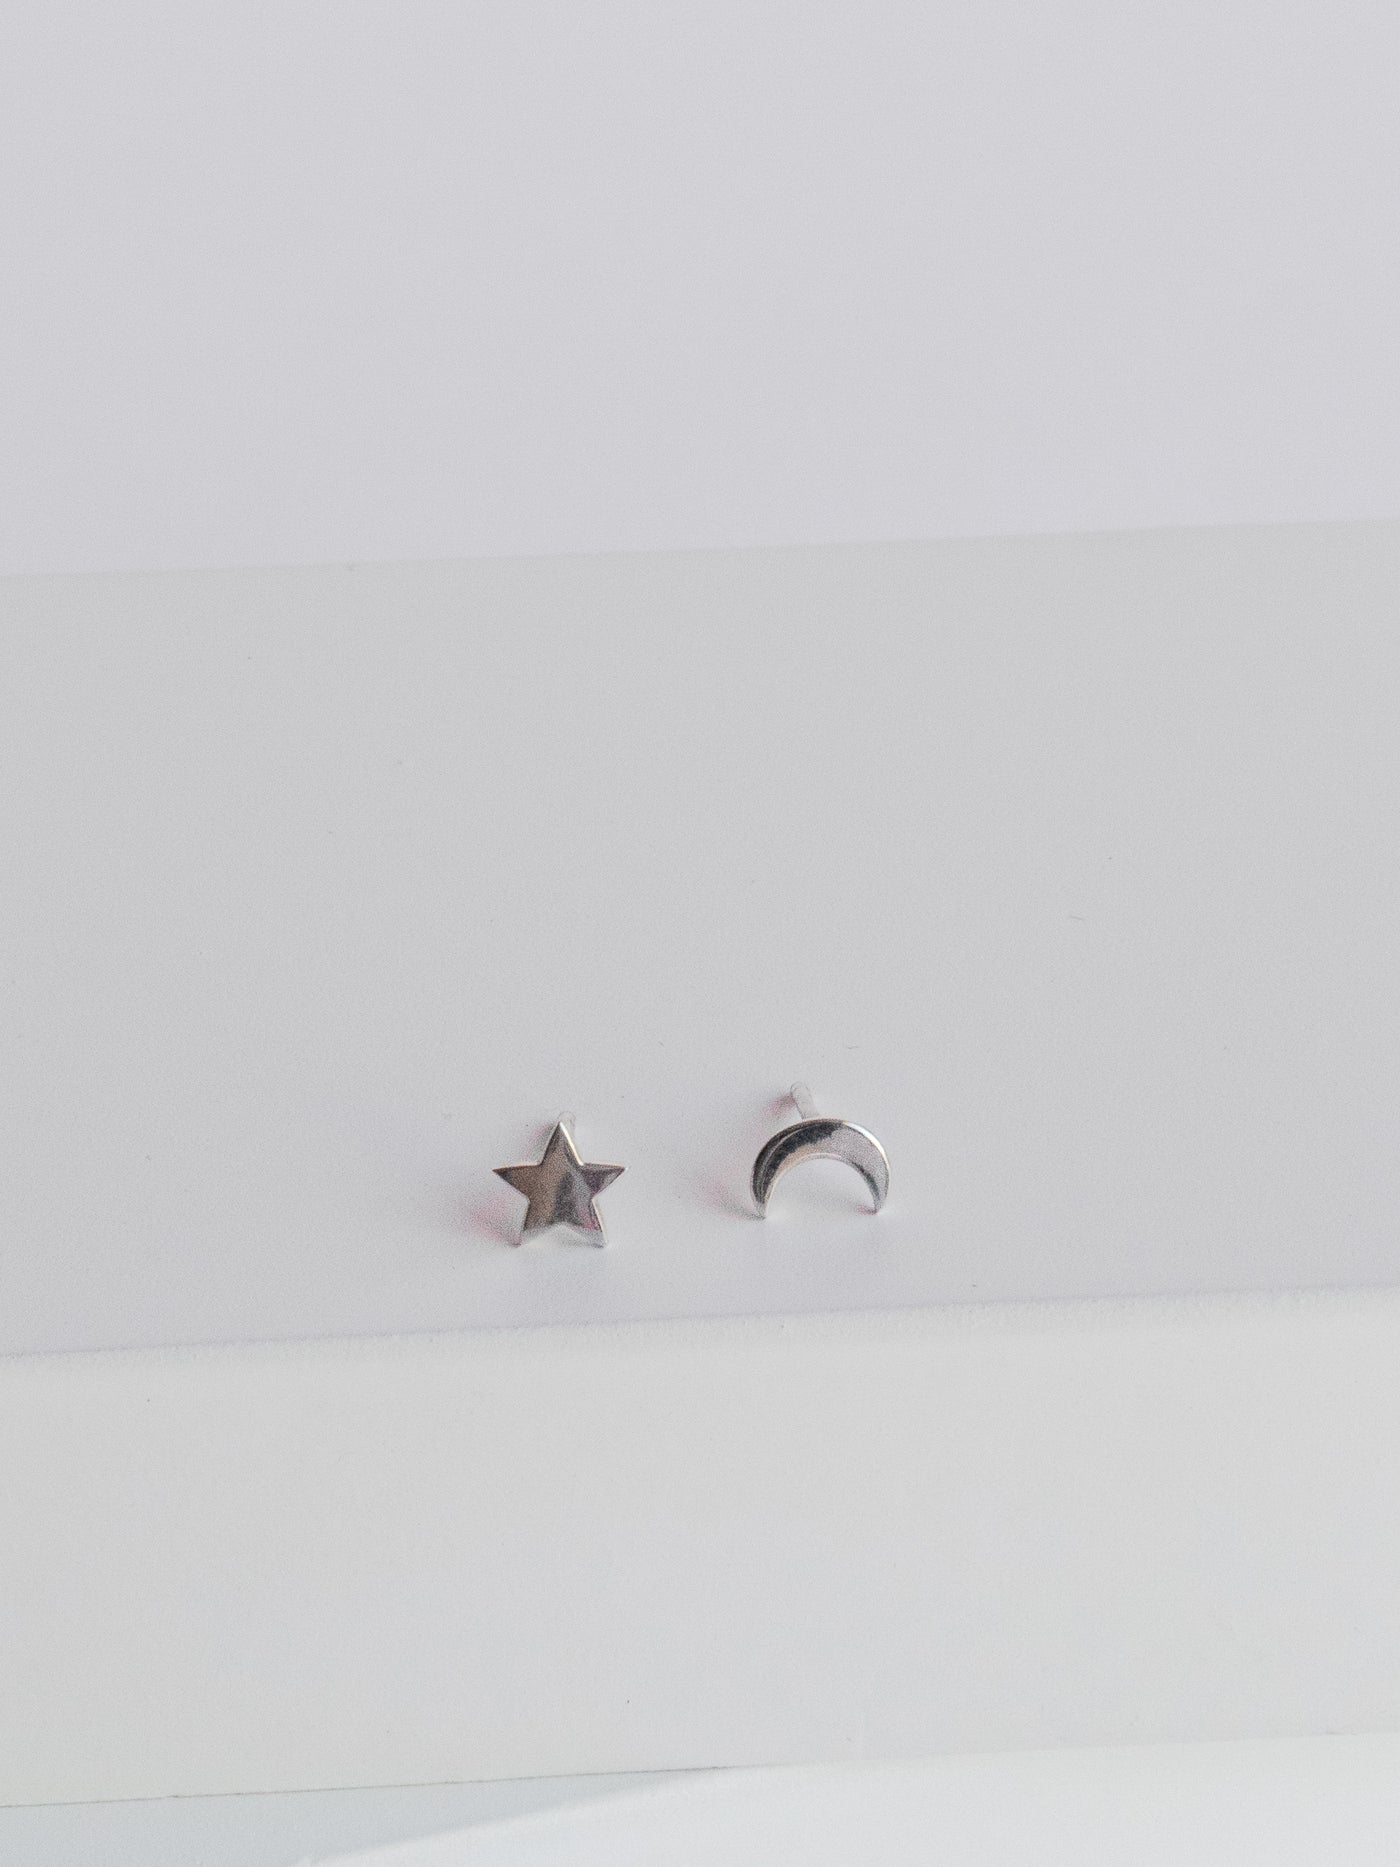 Silver Crescent Moon & Star Stud Earrings are a cute little mismatched crescent moon and star stud earrings set that measure approx. 1/4 inch in size. Made with high quality sterling silver metal.